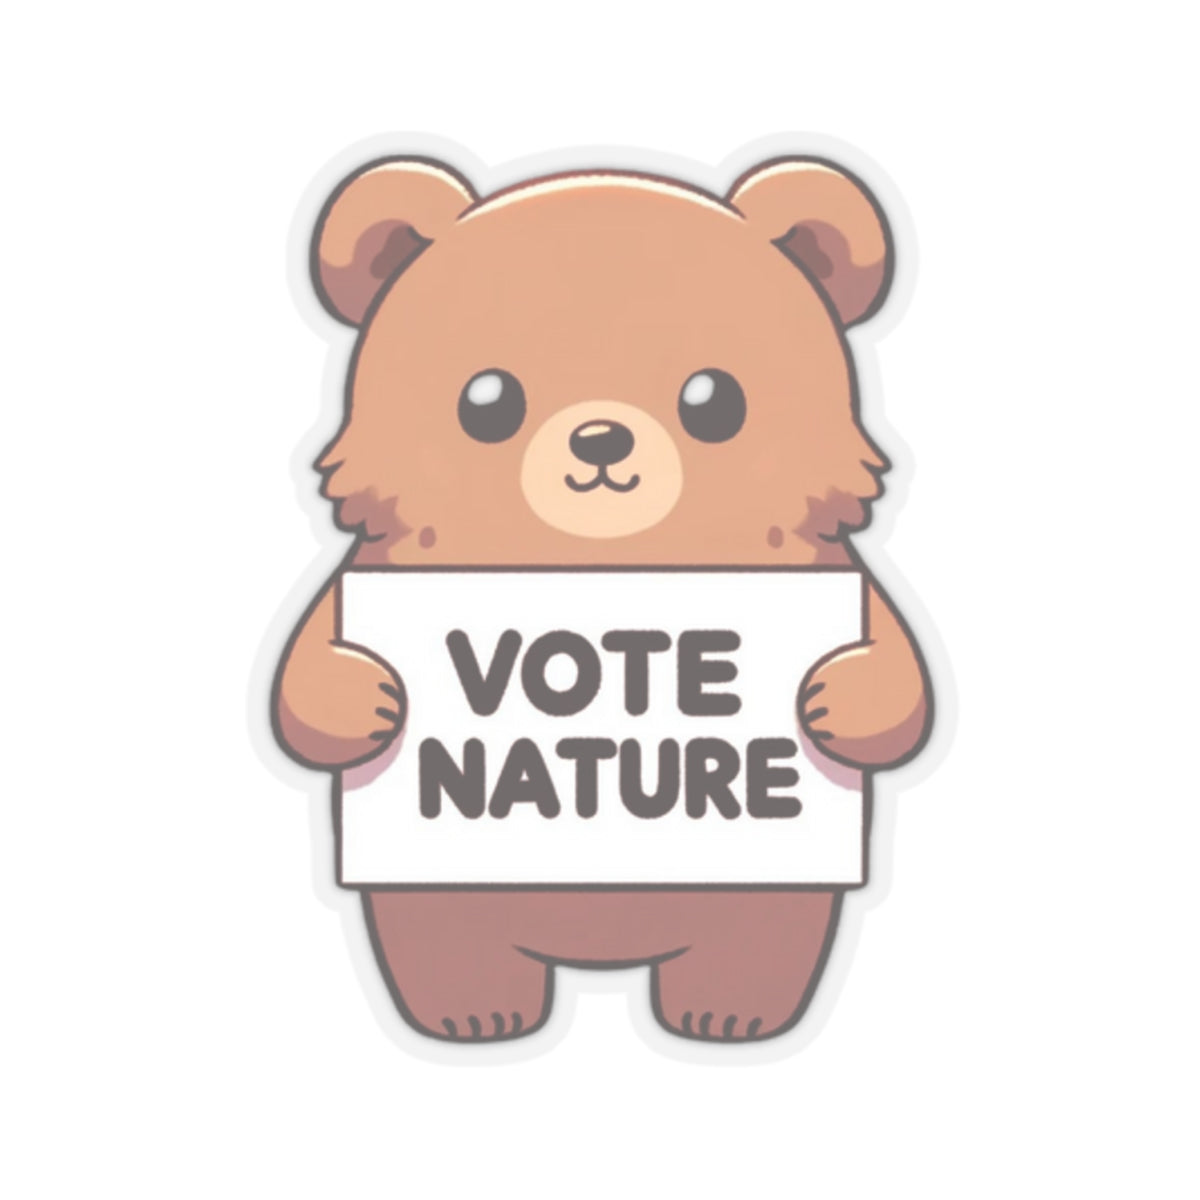 Inspirational Cute Grizzly Bear Statement vinyl Sticker: Vote Nature! for laptop, kindle, phone, ipad, instrument case, notebook, mood board